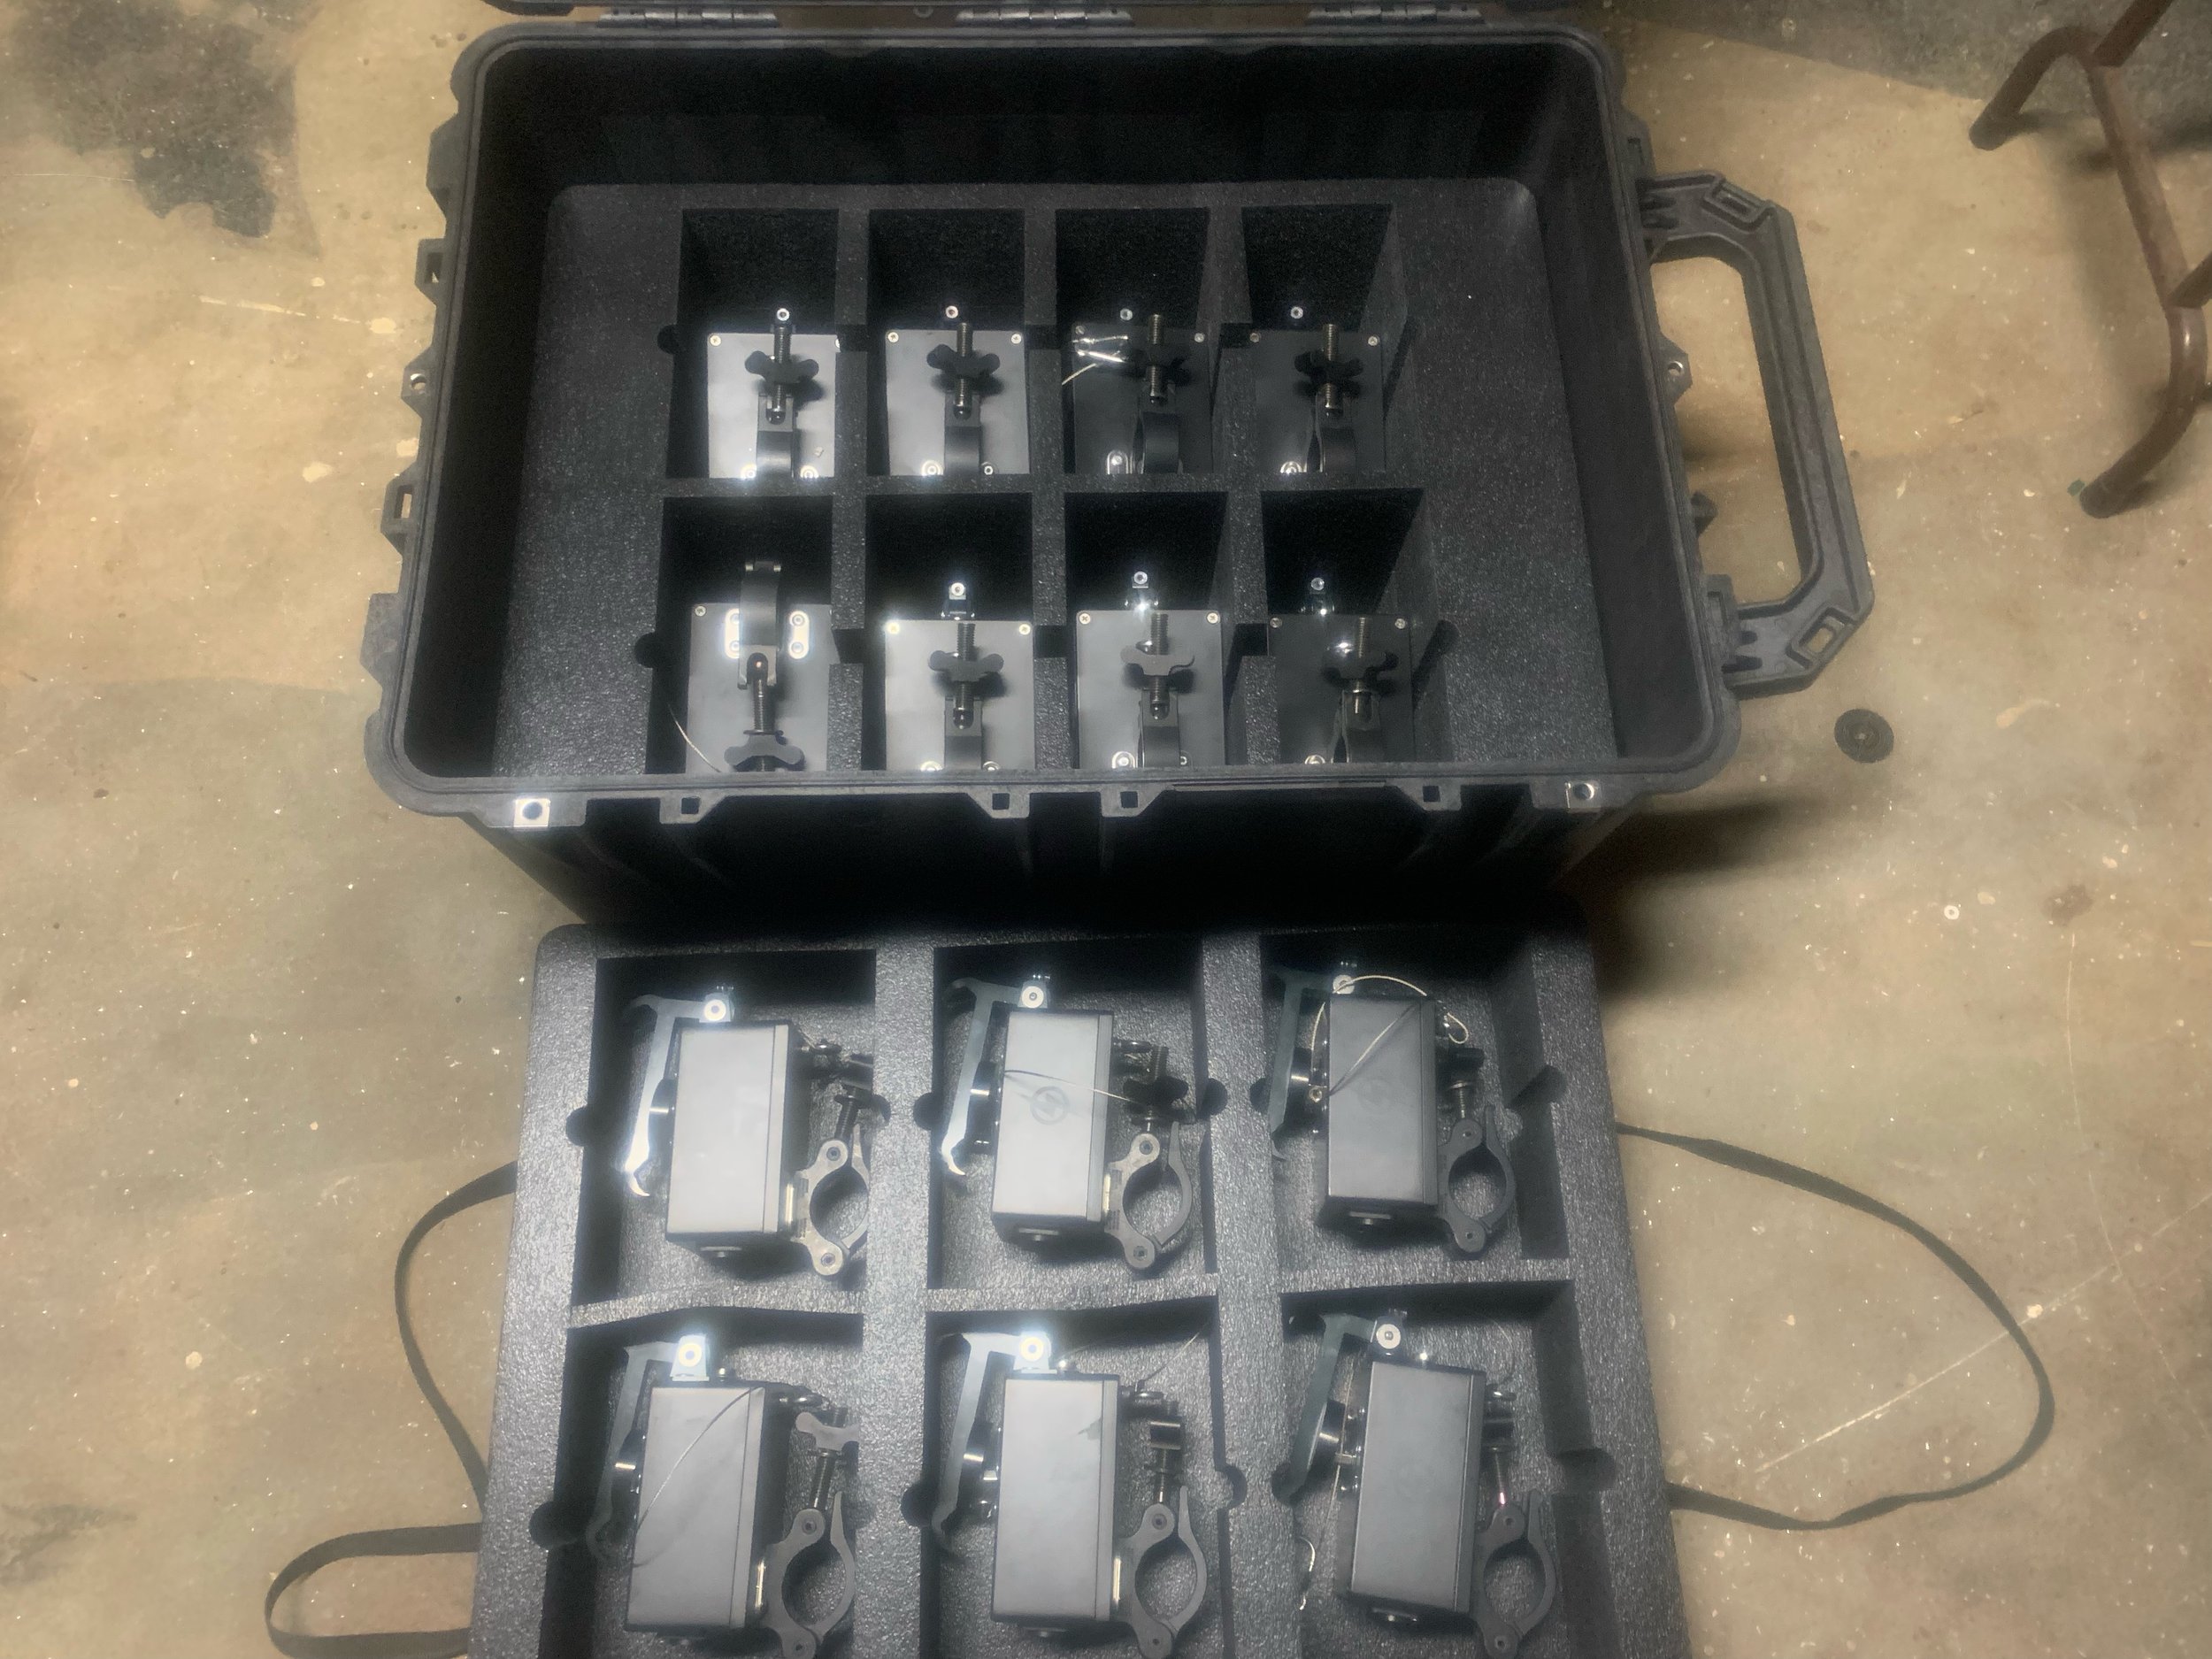  The MEDDs travel in Pelican 1660 cases.  Custom foam trays can accommodate up to 14 units per Pelican. All cabling and control travel in an additional 1660. 